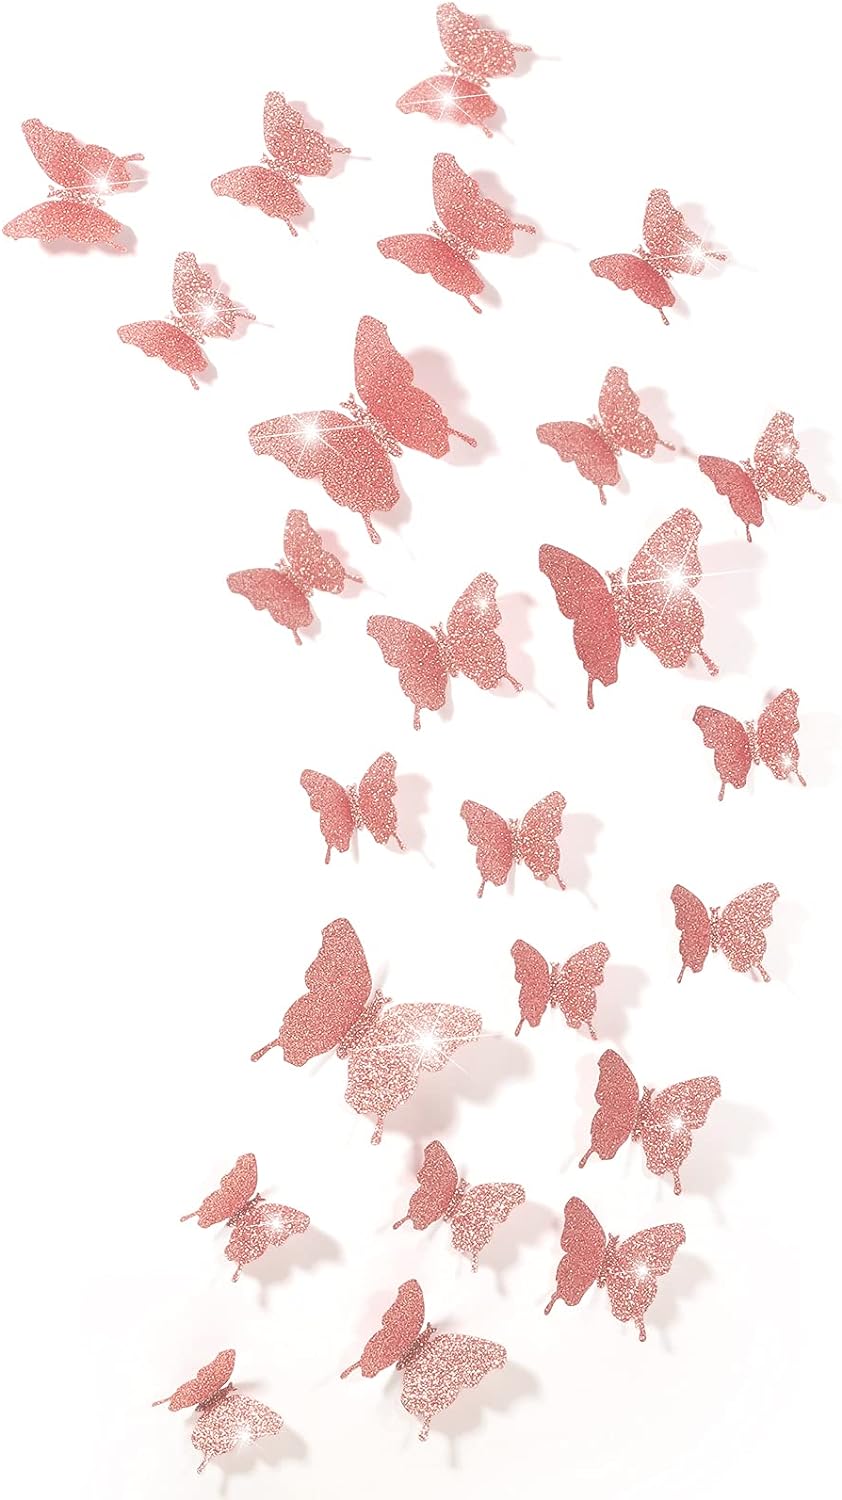 48 Pieces Butterfly Wall Decor DIY Mirror 3D Butterfly Stickers Removable Butterfly Decals for Home Nursery Classroom Kids Bedroom Bathroom Living Room Decor (Glitter Pink)